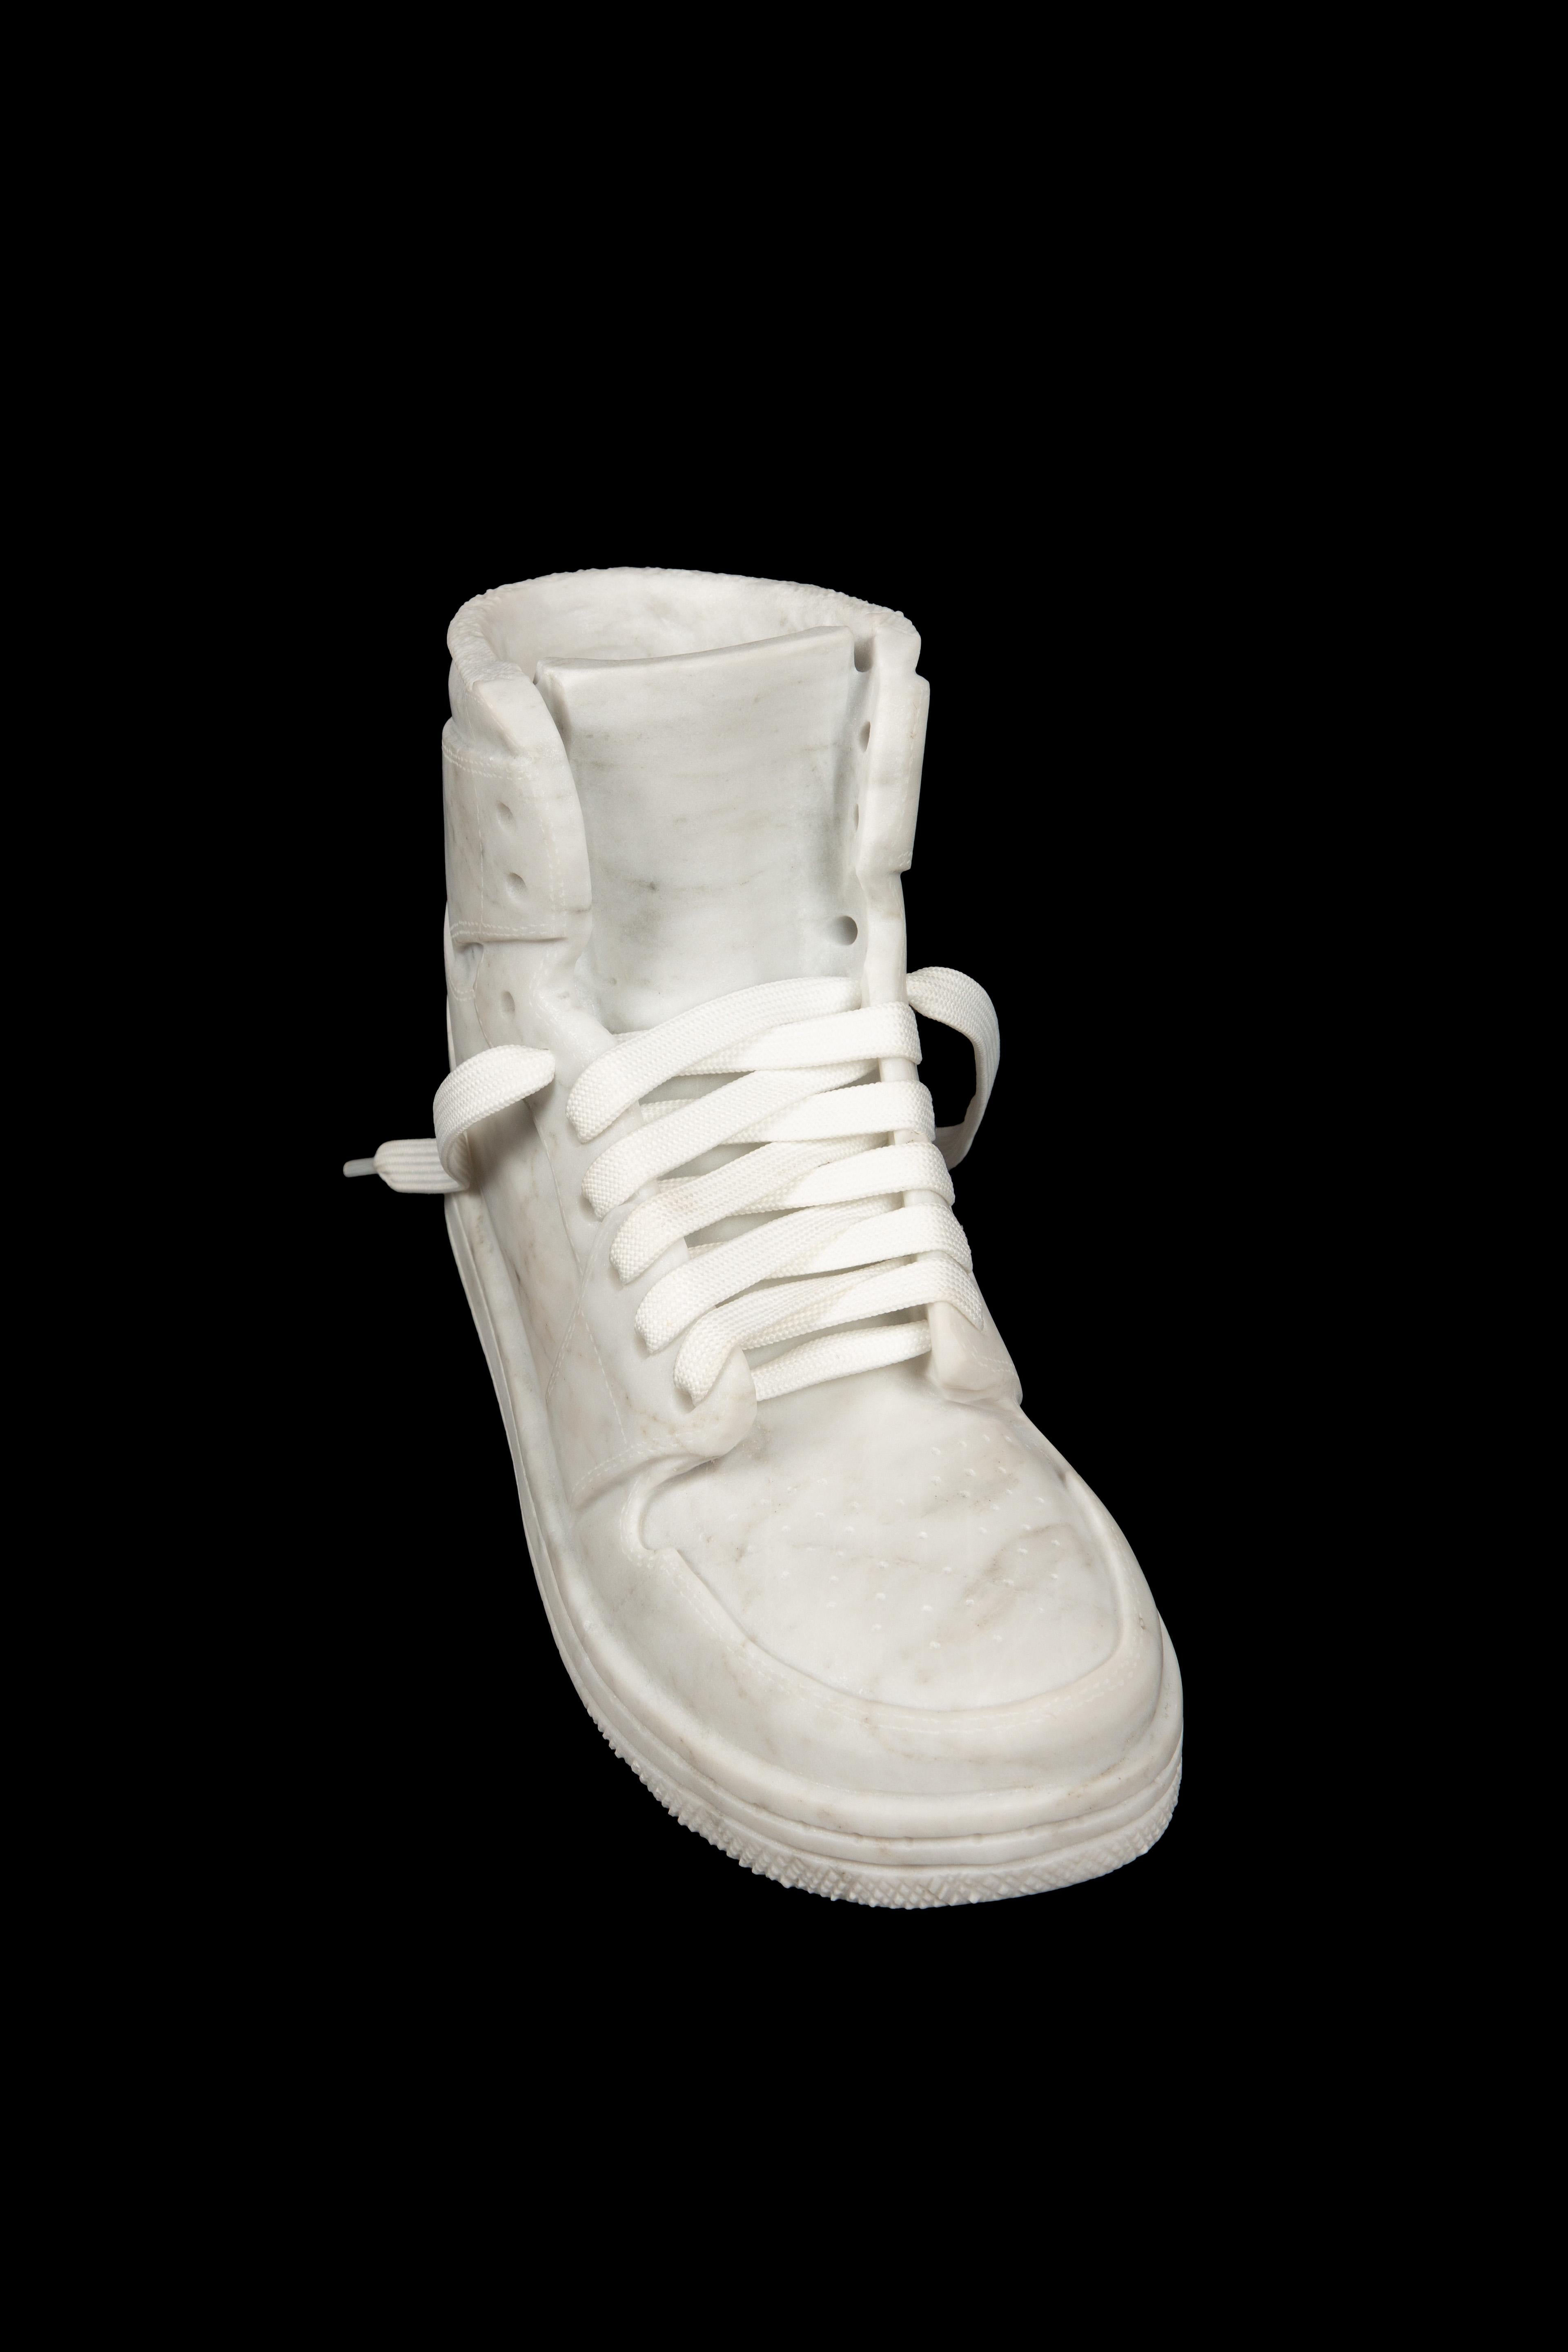 American Carved White Marble Hightop Sneaker sculpture